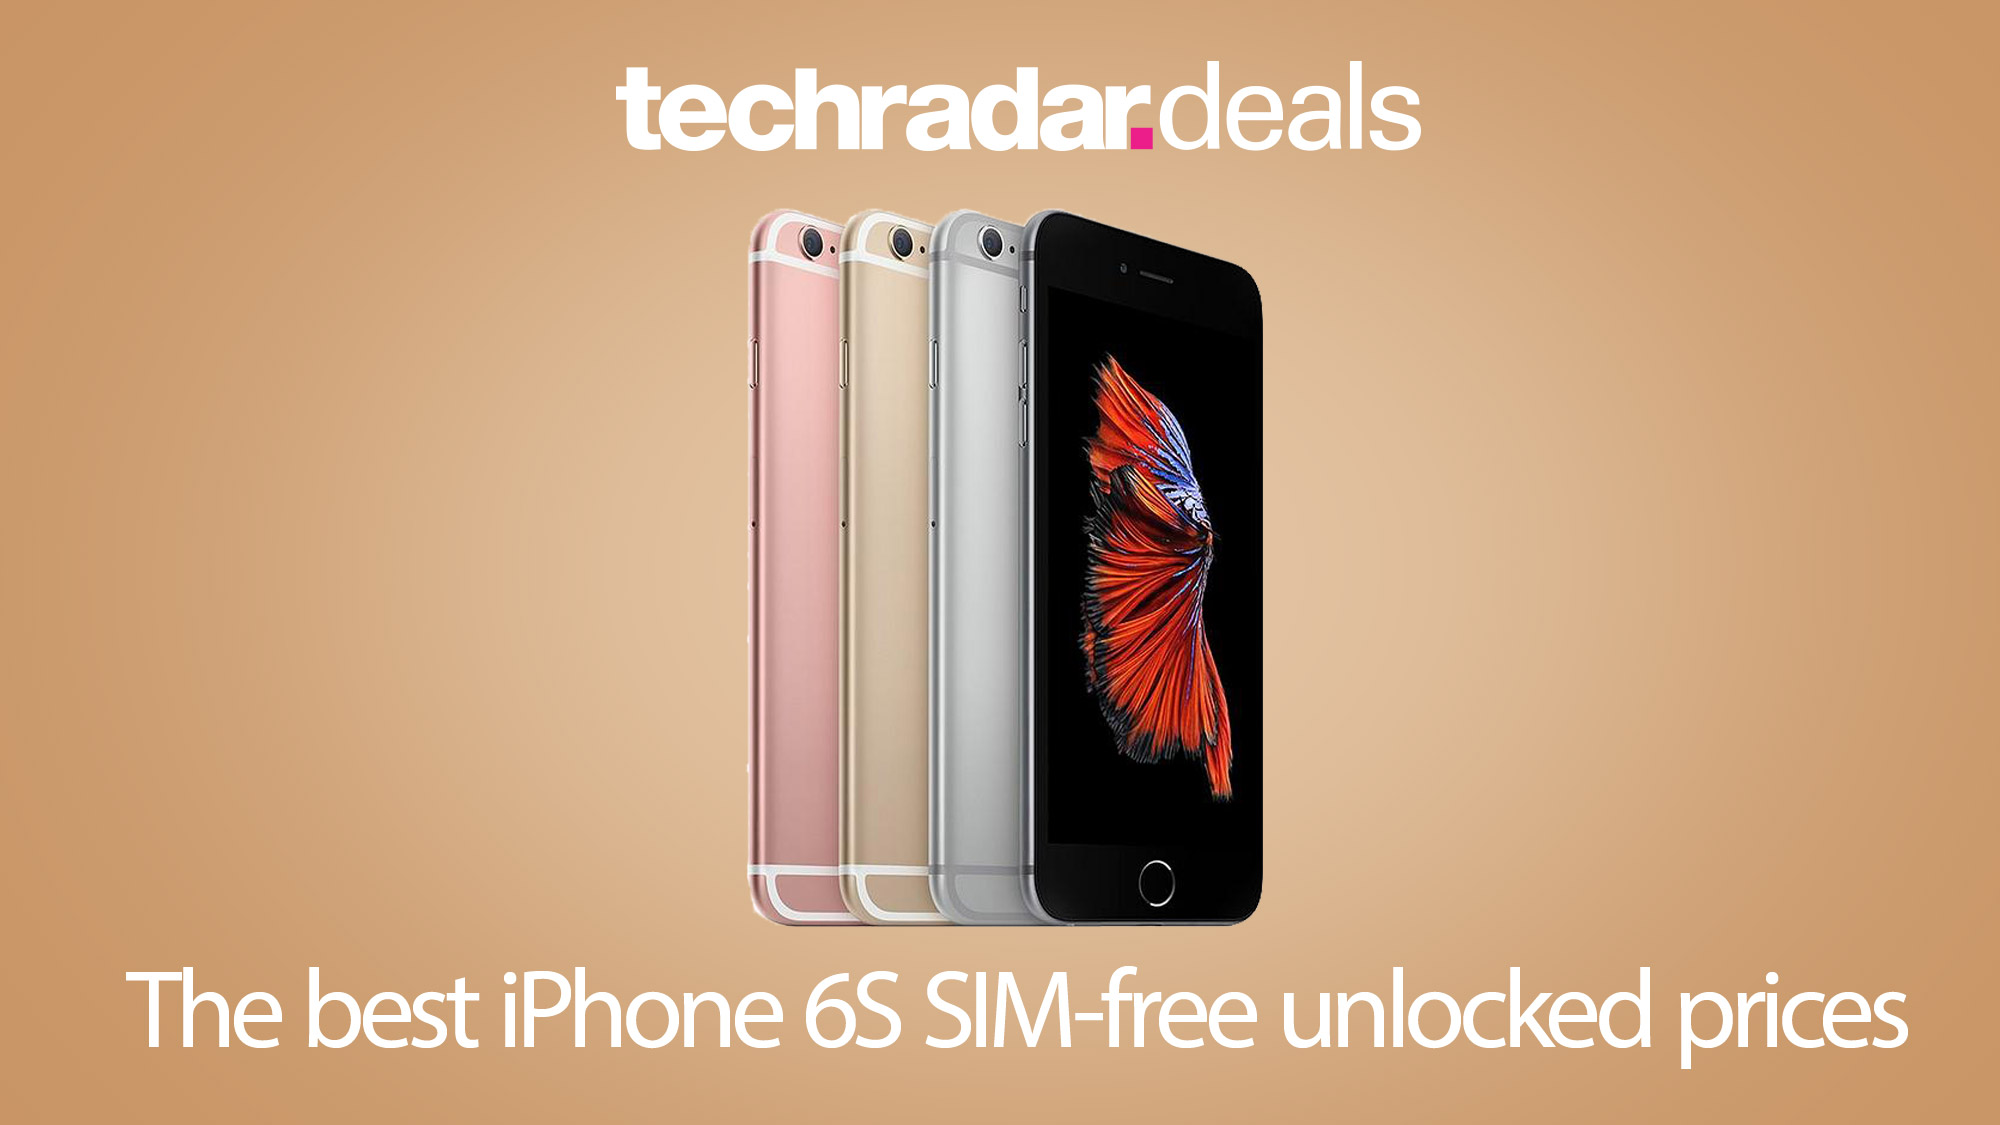 The Cheapest Iphone 6s Price For Unlocked Sim Free Plans In November 2020 Techradar